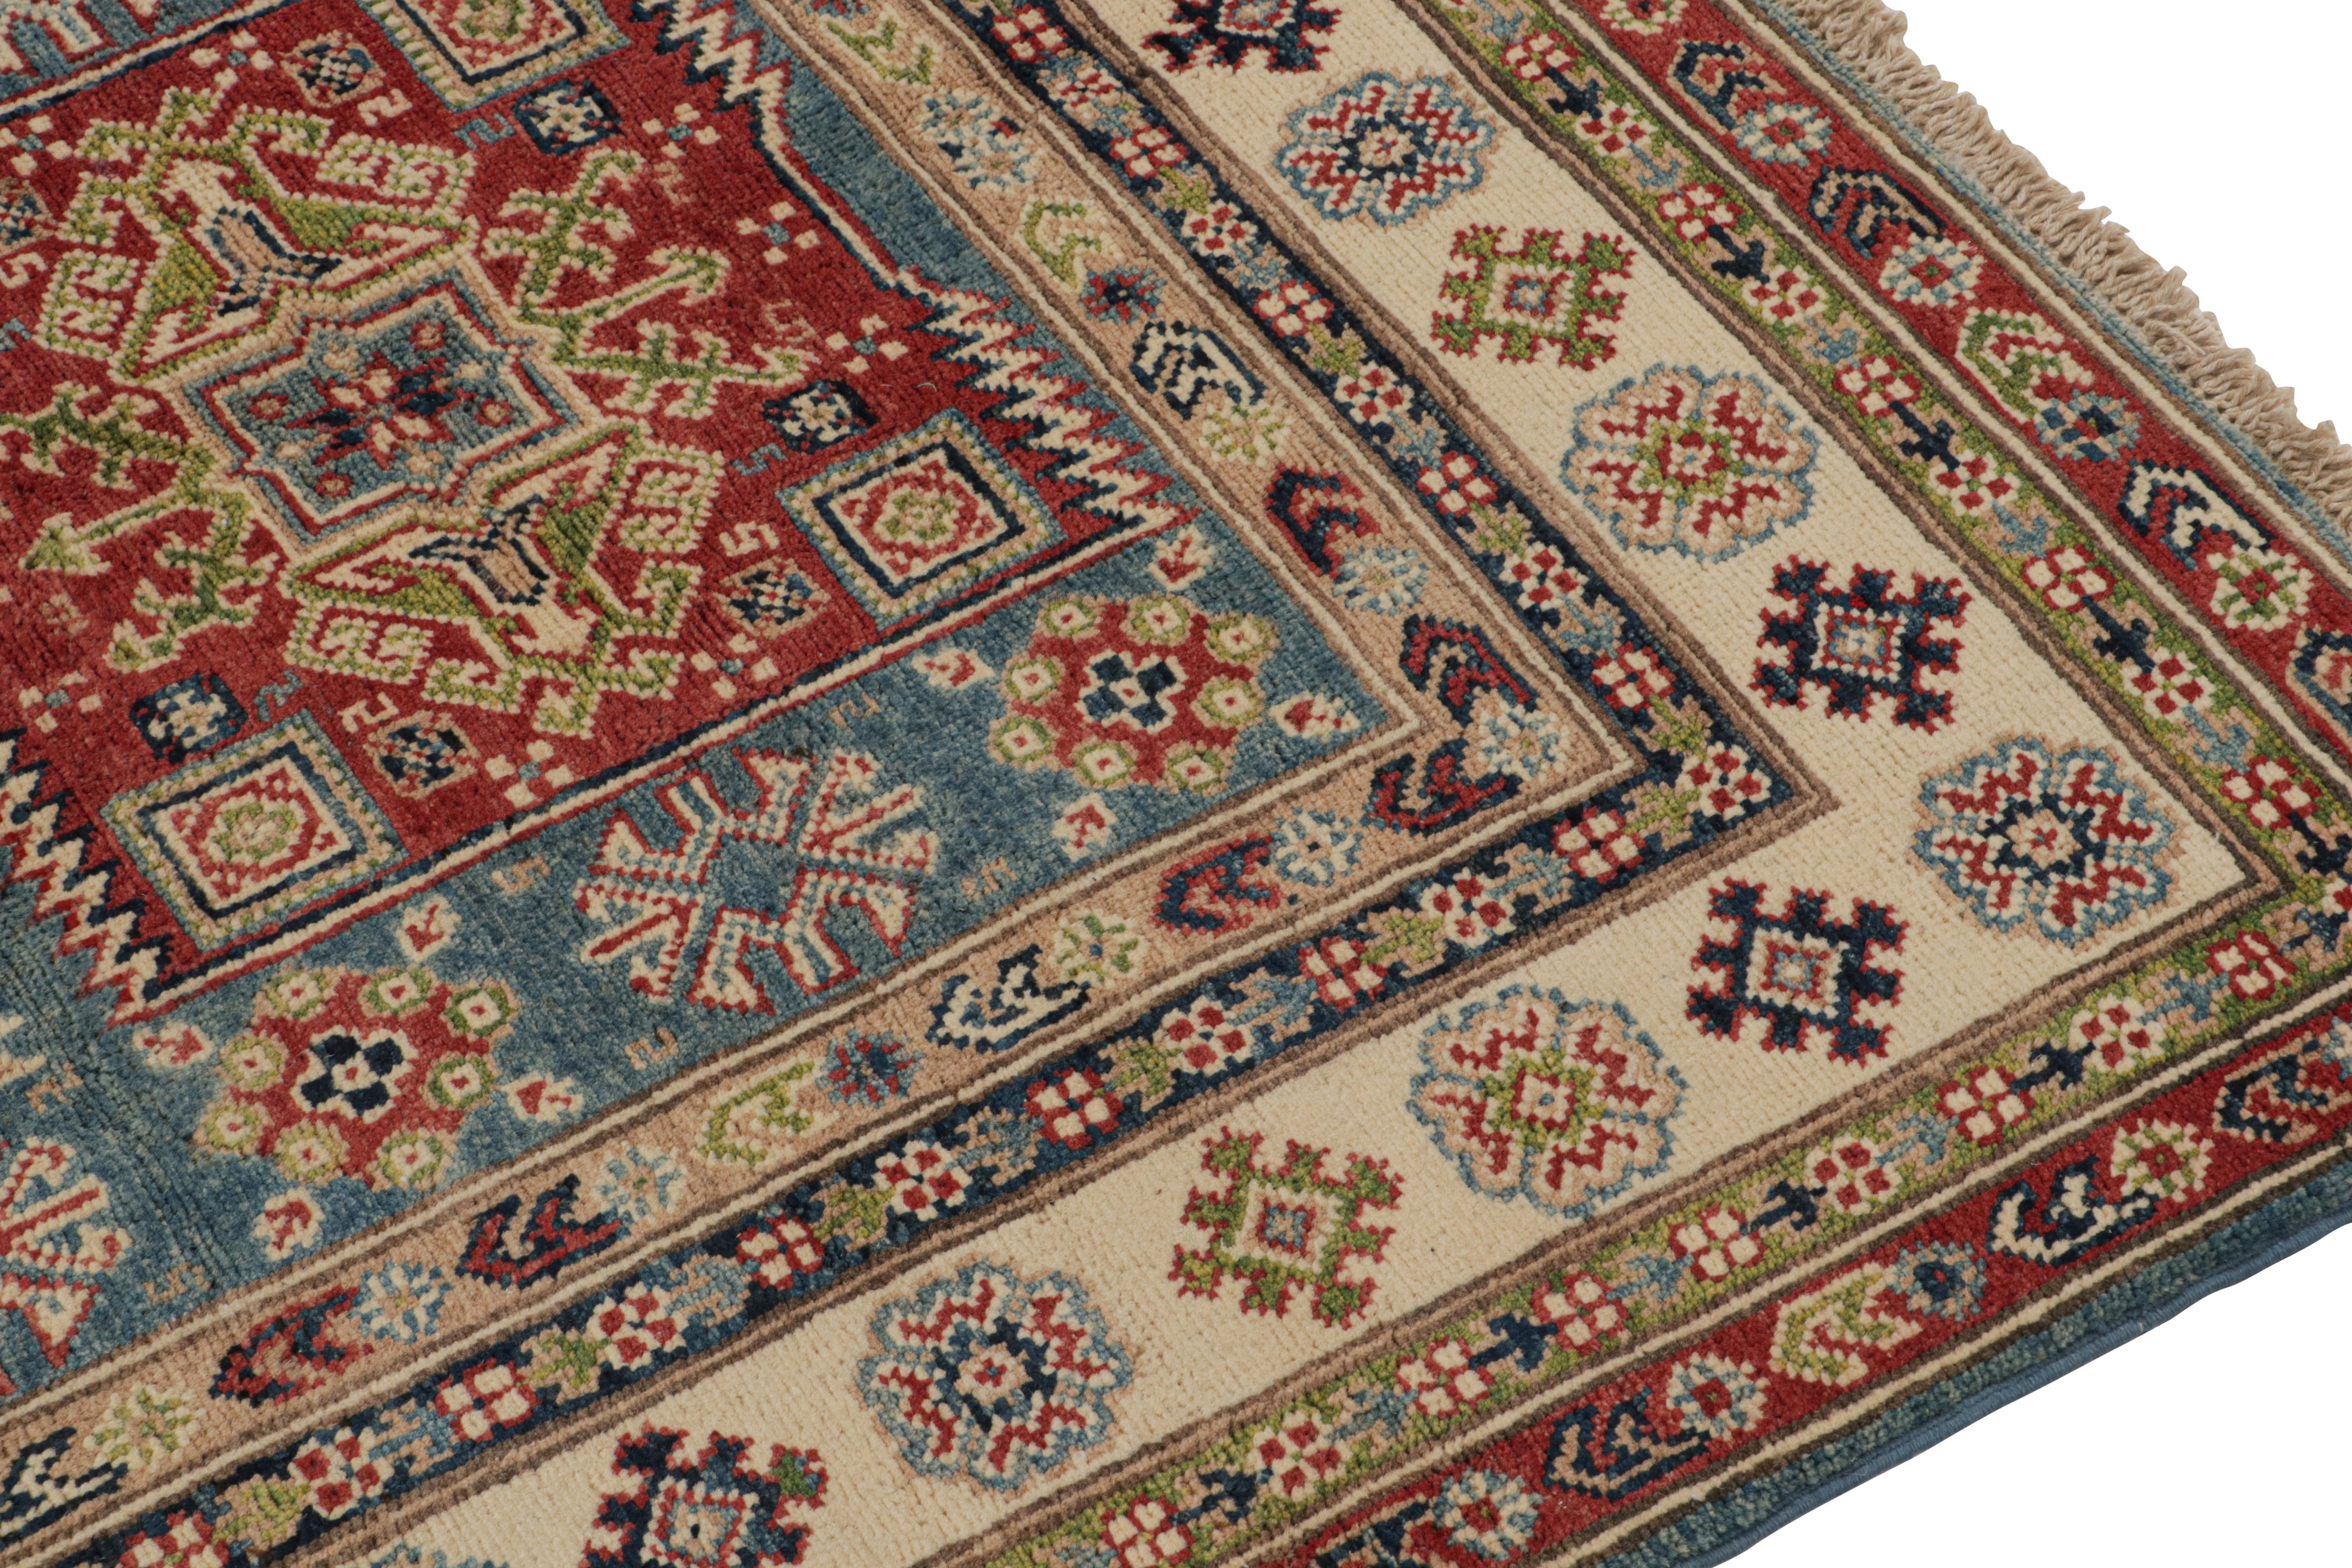 Hand-Knotted Rug & Kilim’s Kazak style rug in Red, Blue and Beige-Brown Geometric Patterns For Sale